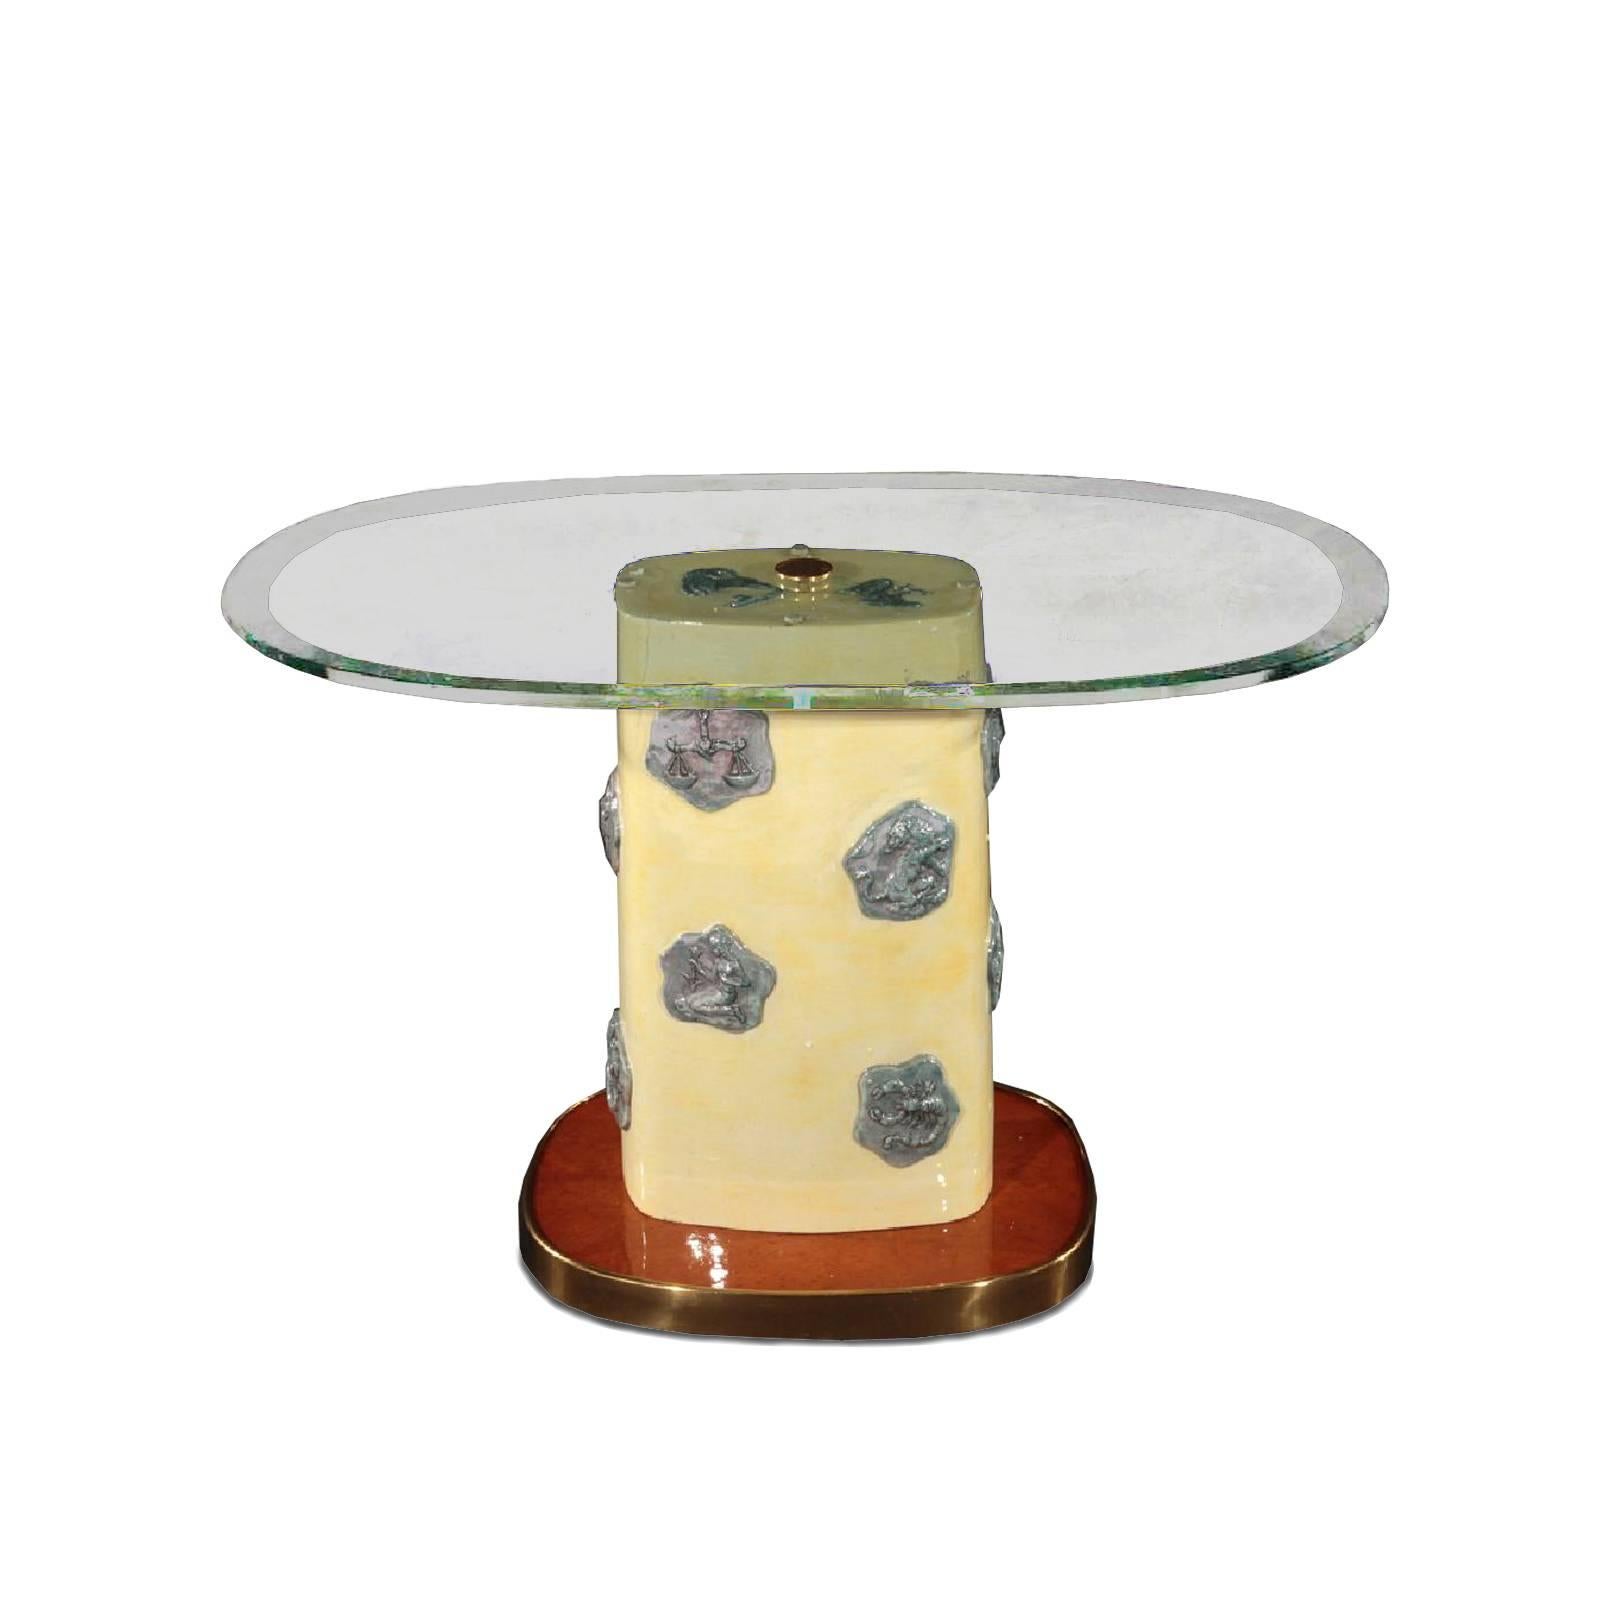 A stunning and unique 1960 Italian side table with glass oval top, glazed ceramic base with zodiac signs motif, raised on brass trimmed base.

 